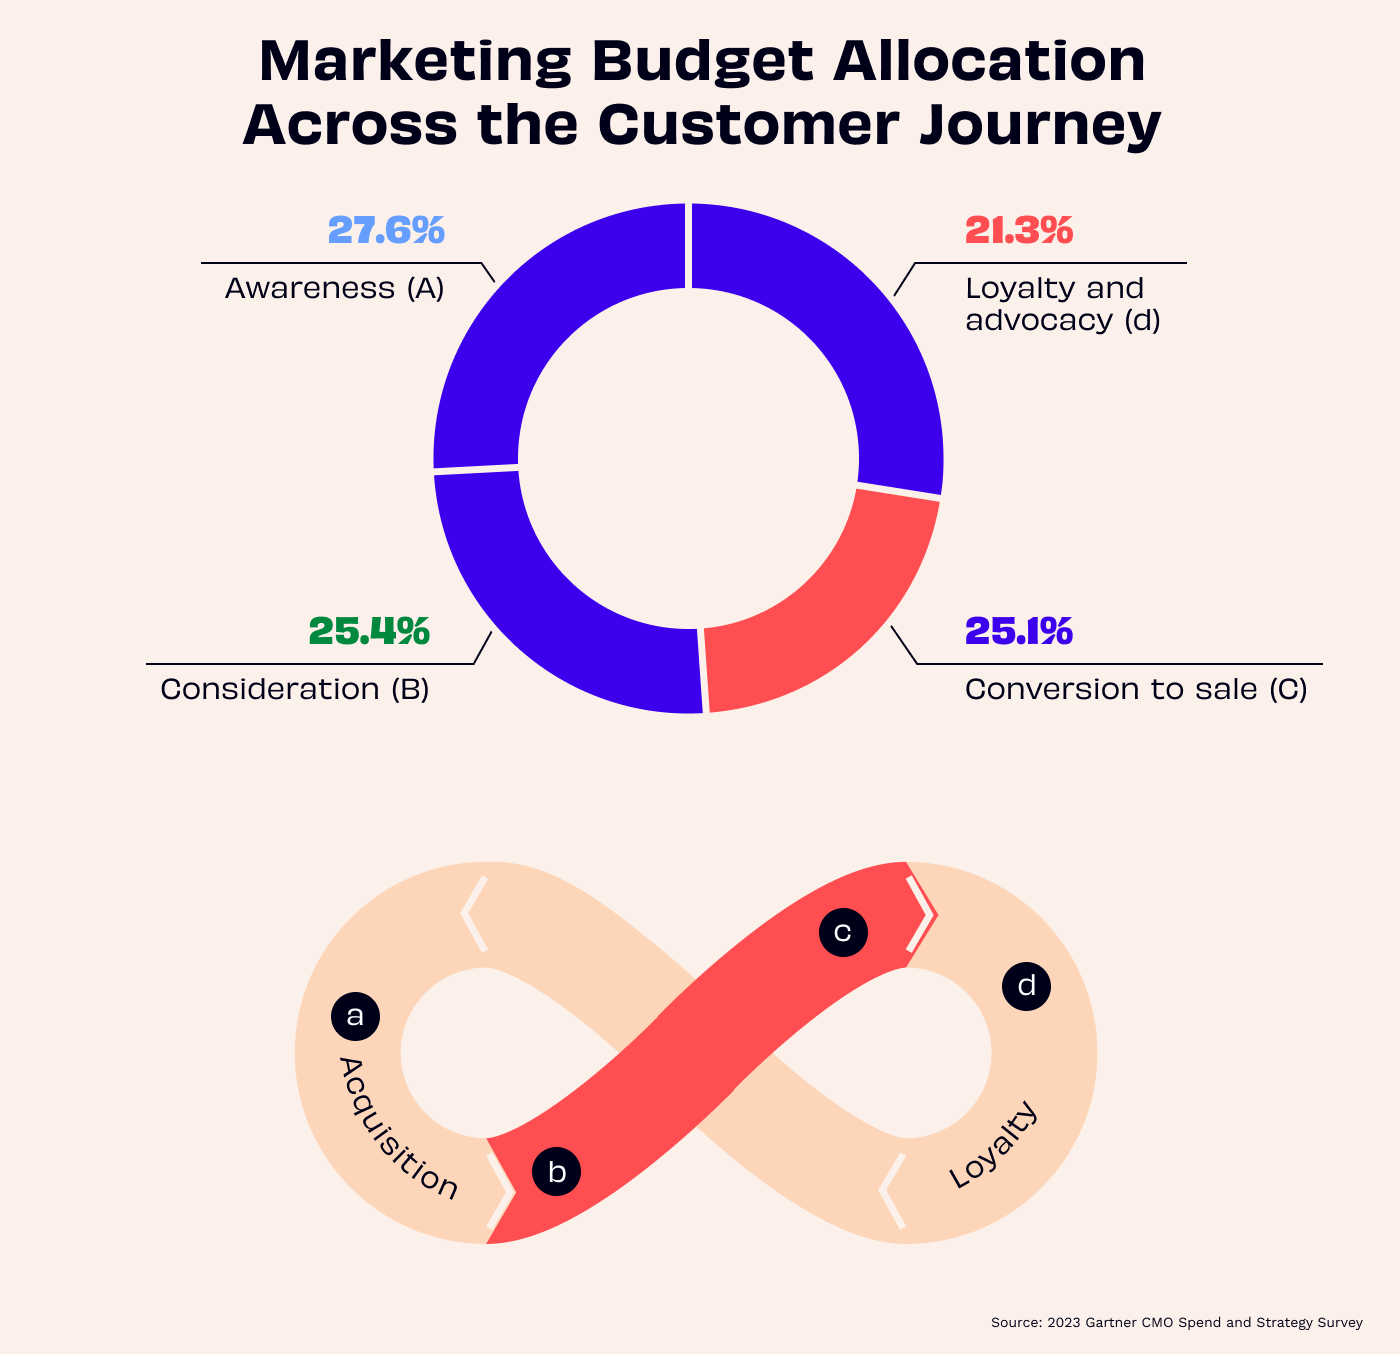 Donut pie chart showing how the marketing budget is allocated across the customer journey